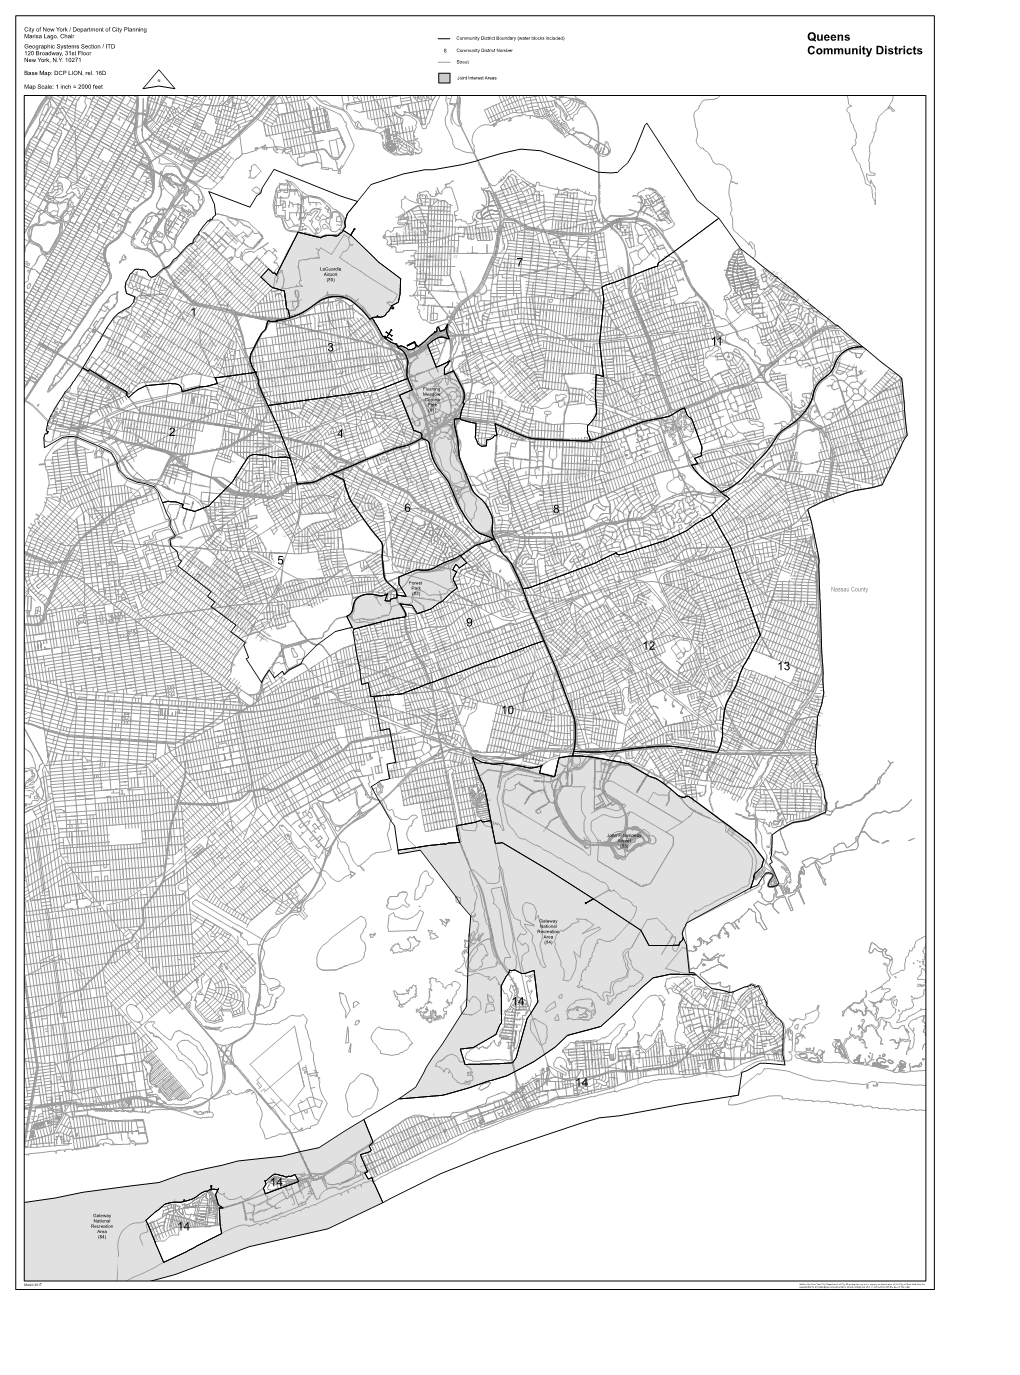 Queens Community Districts